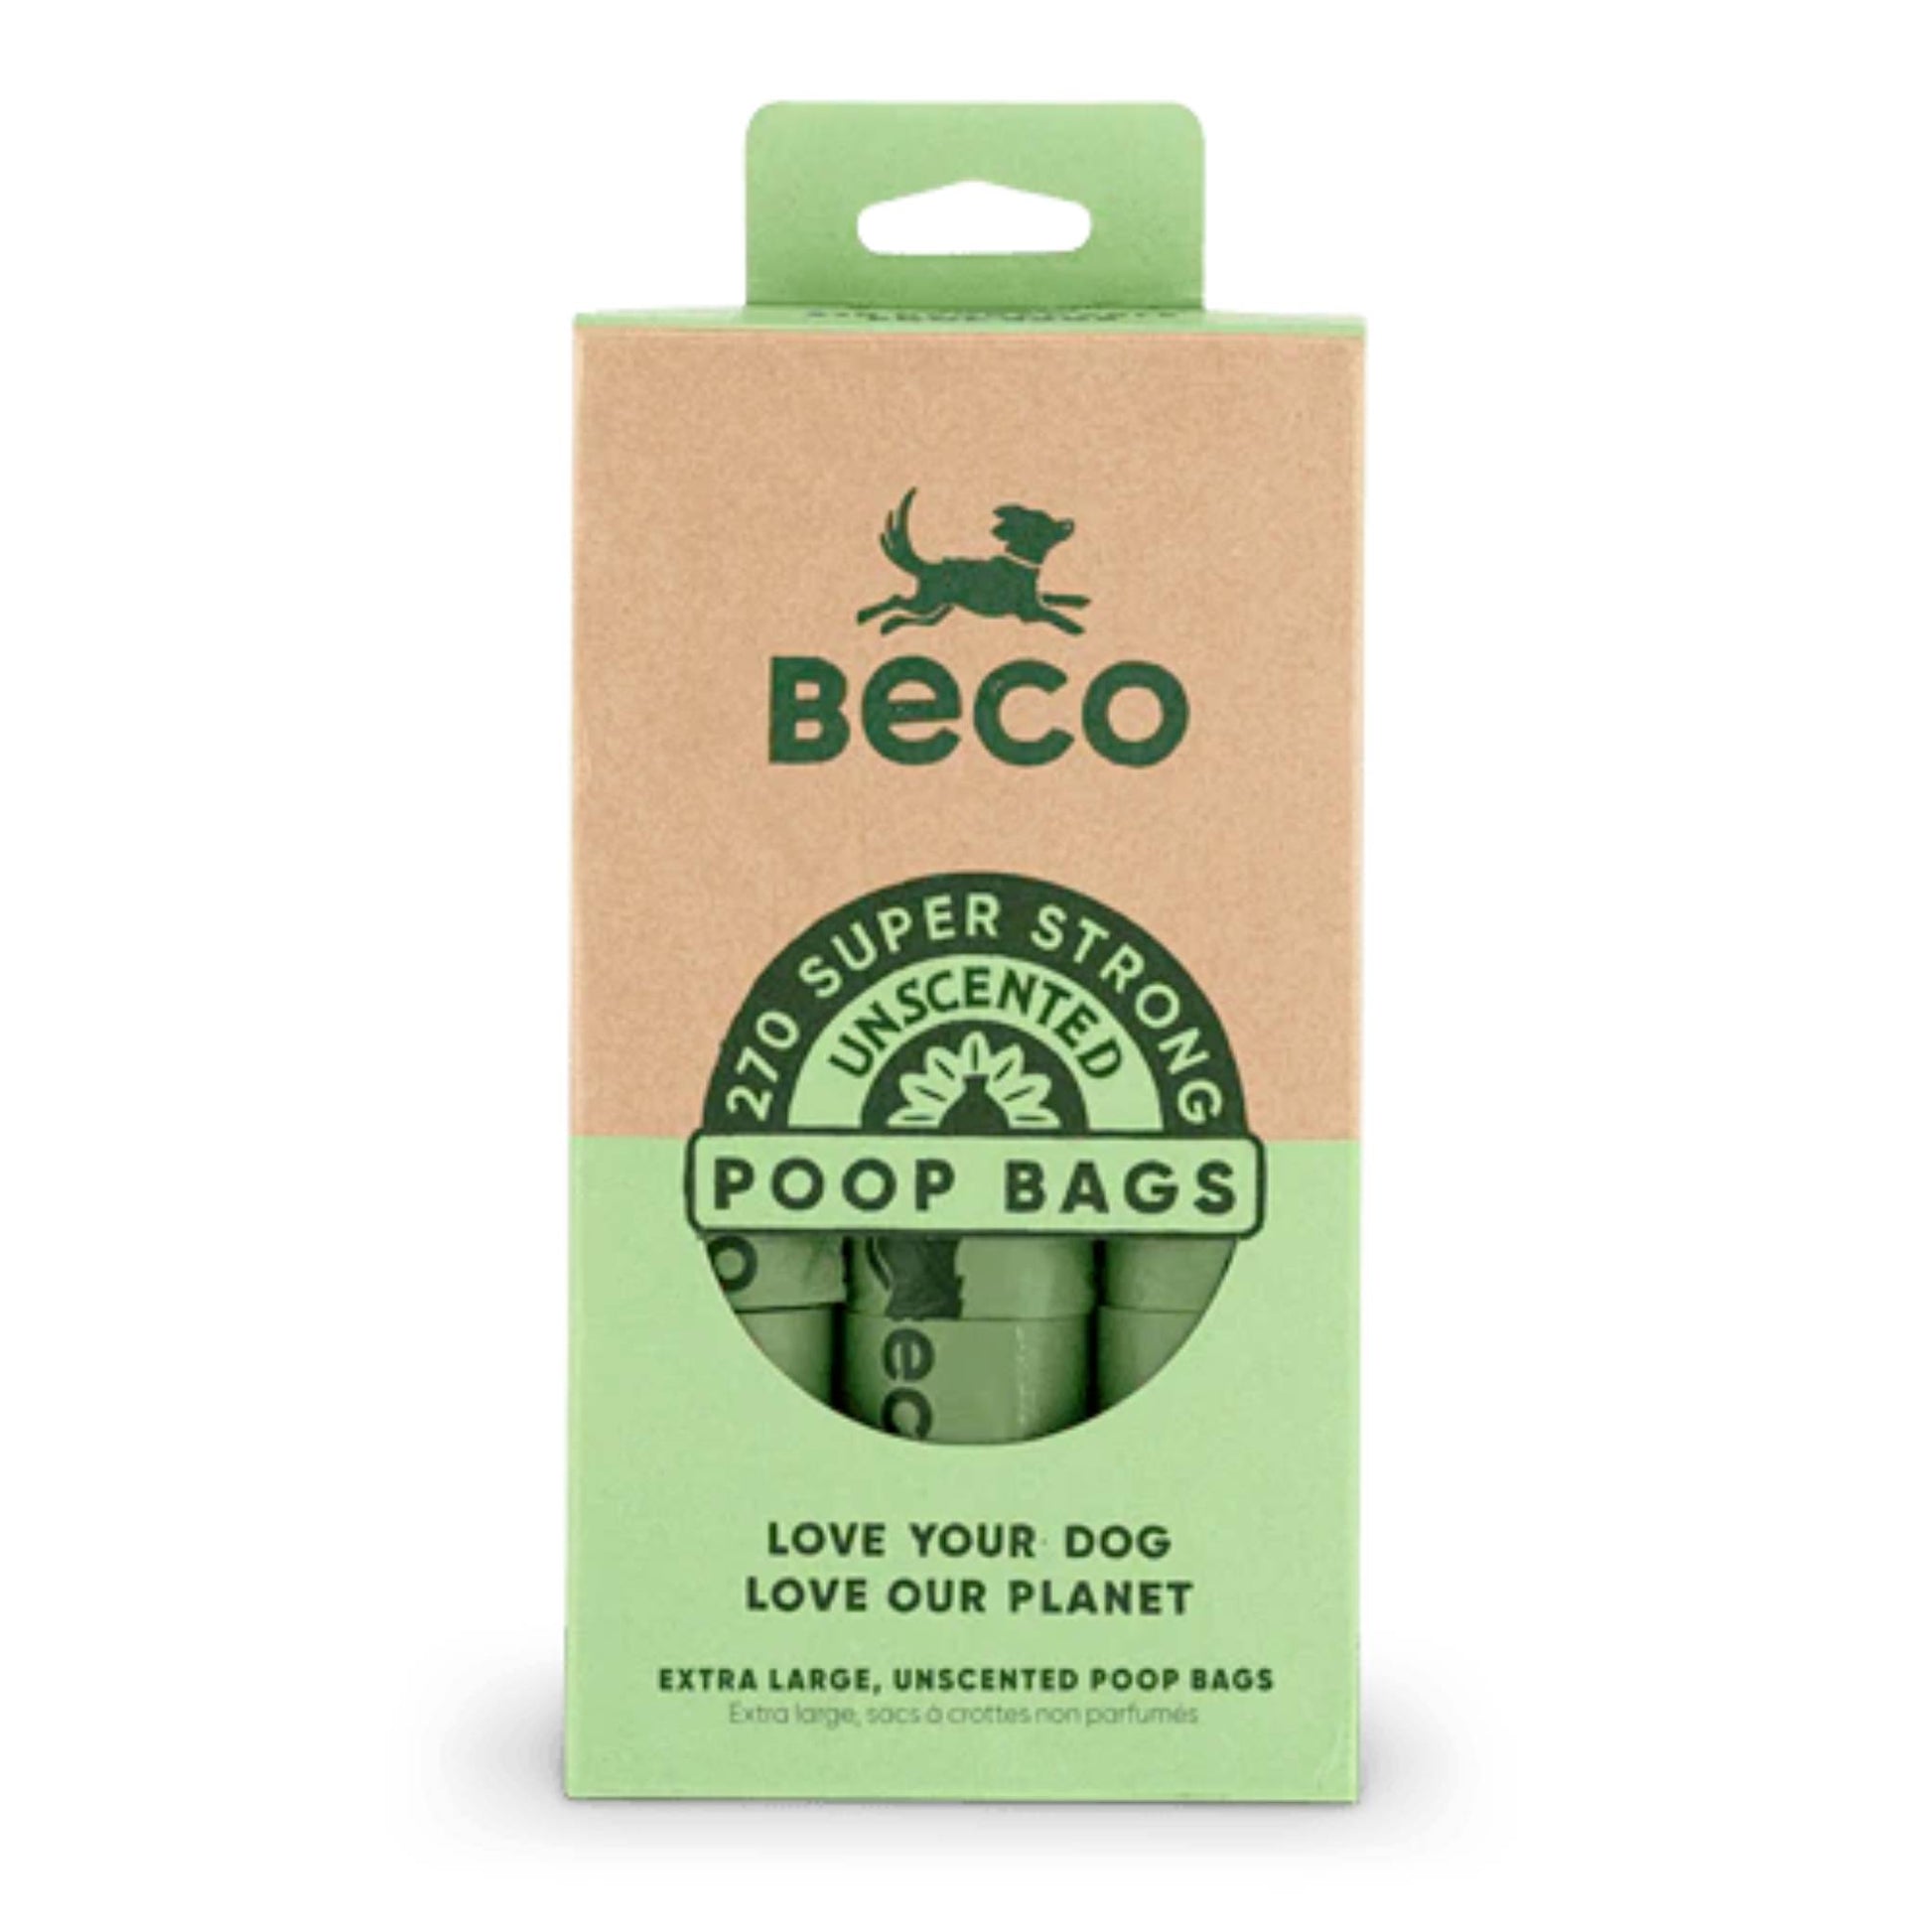 Beco Unscented Poo Bags